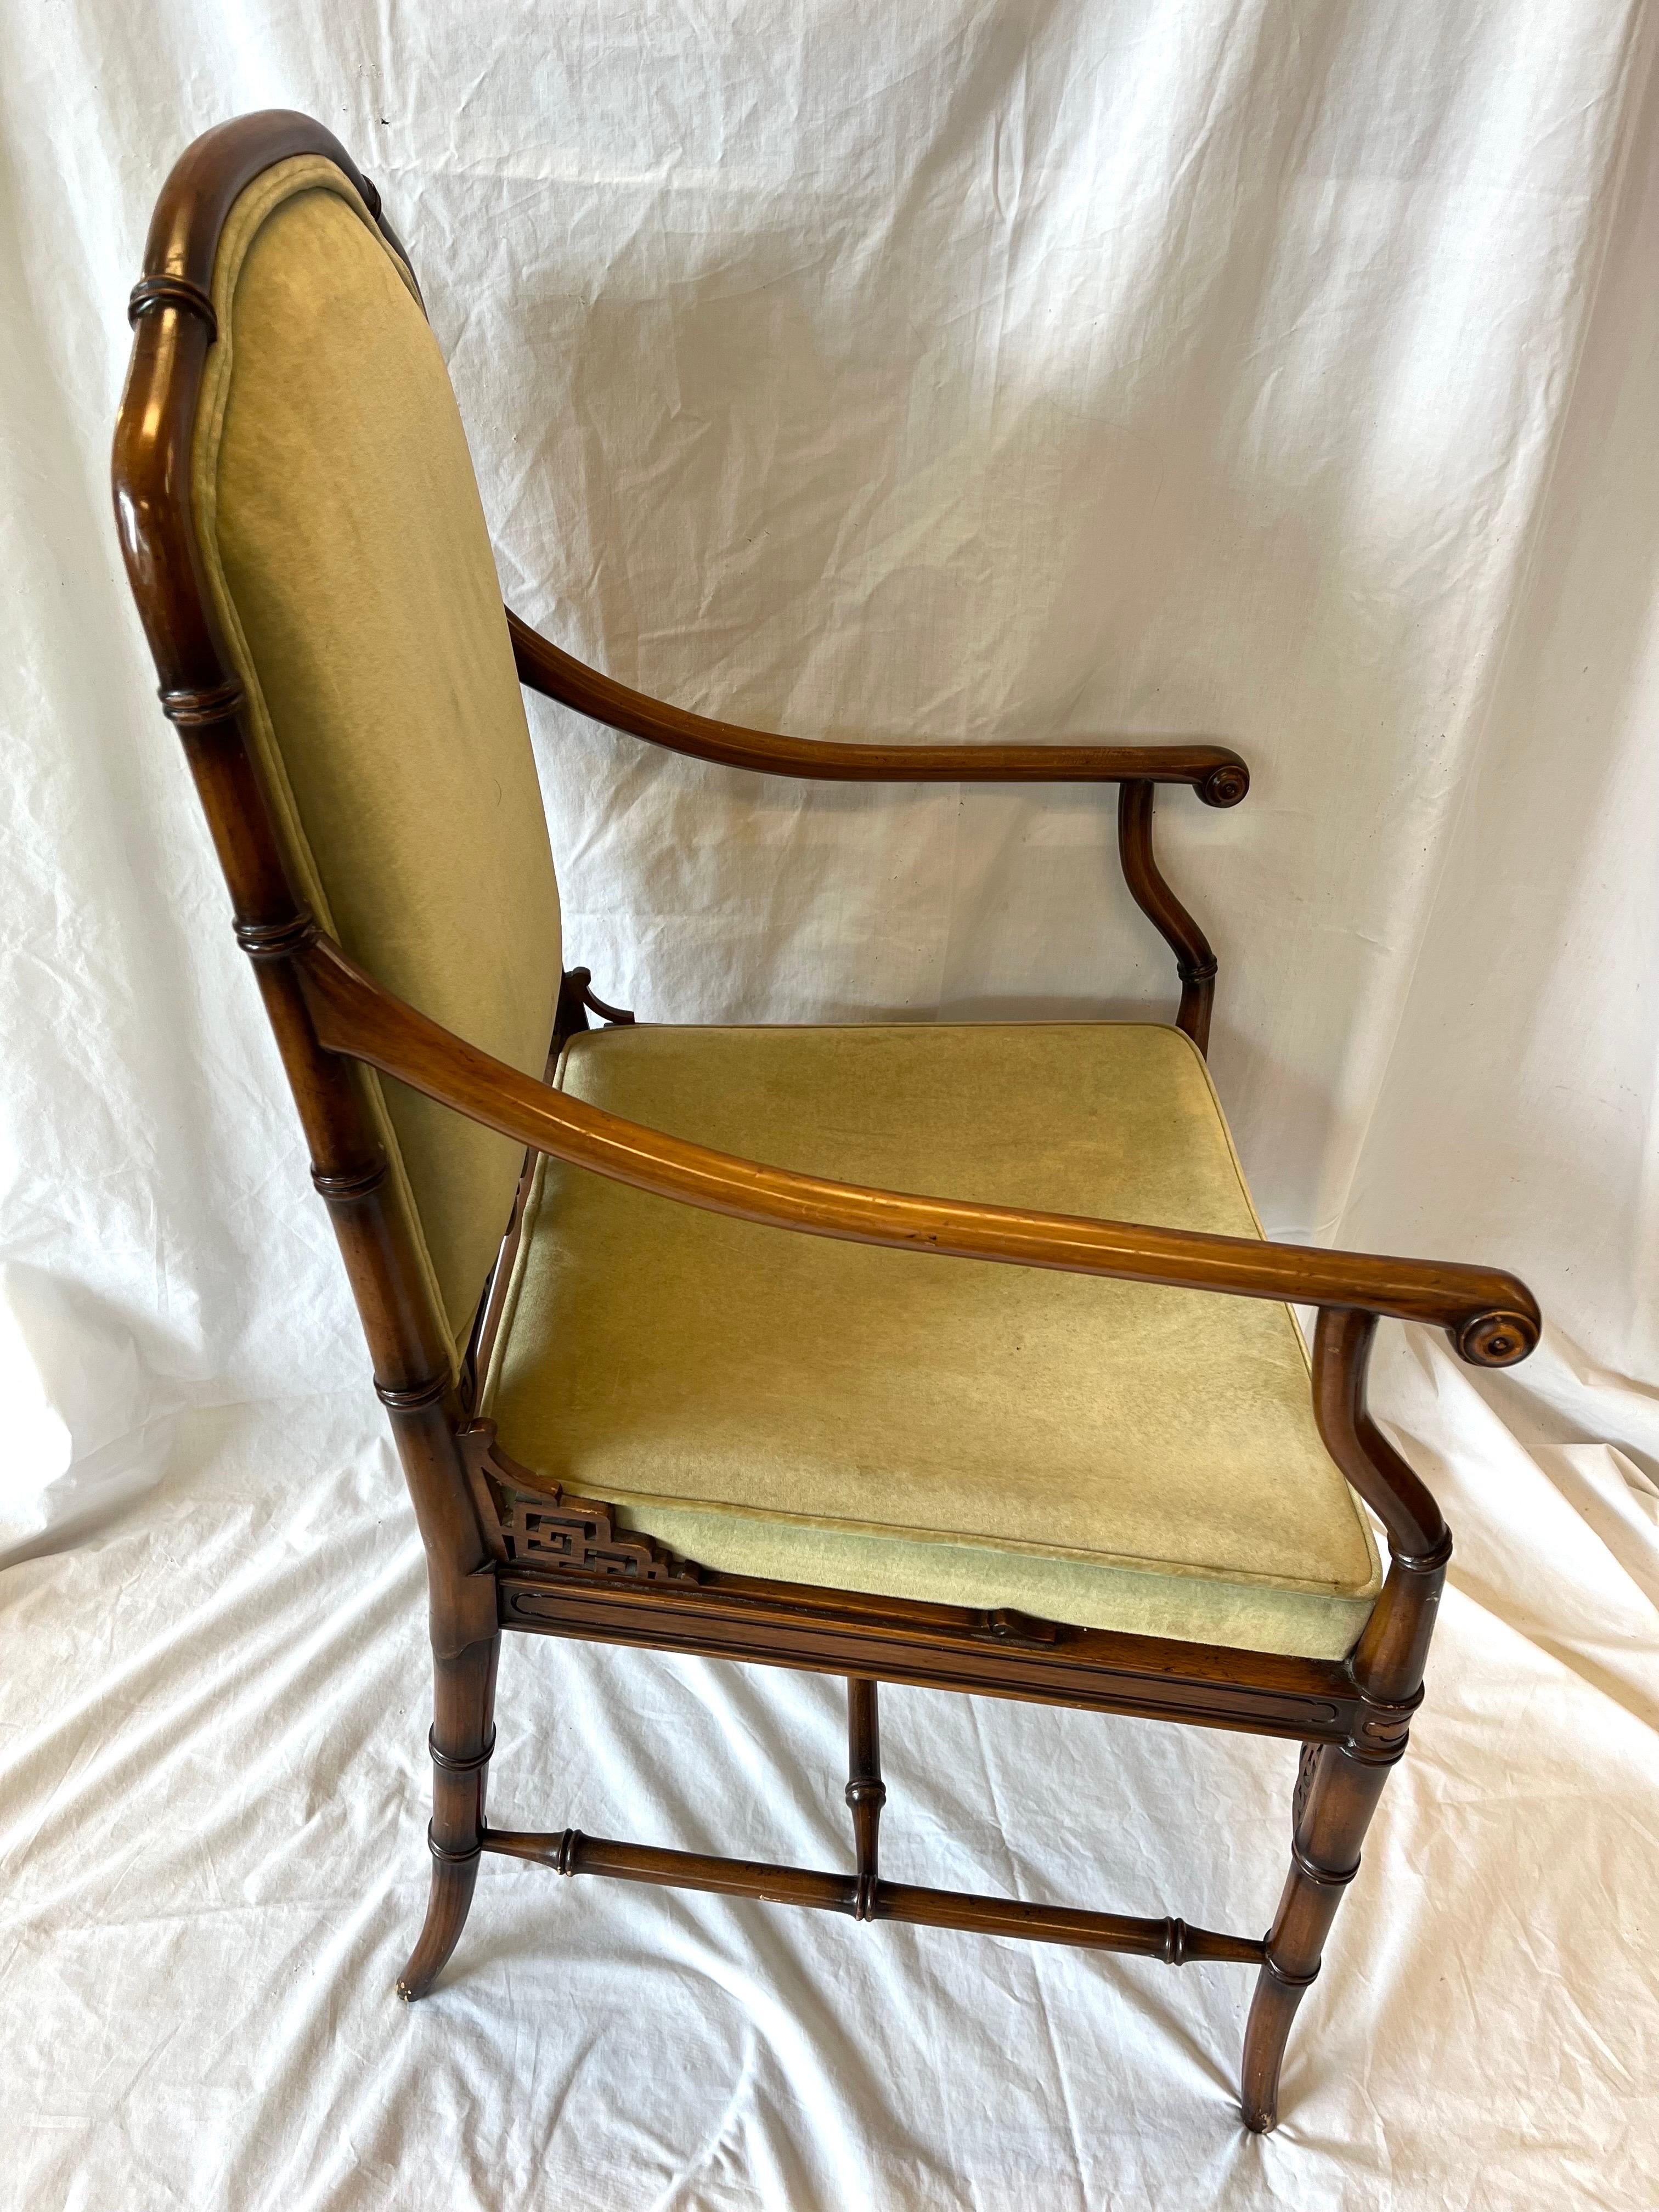 Vintage Faux Bamboo Chinoiserie Style Upholstered Fretwork Armchair Desk Chair 8